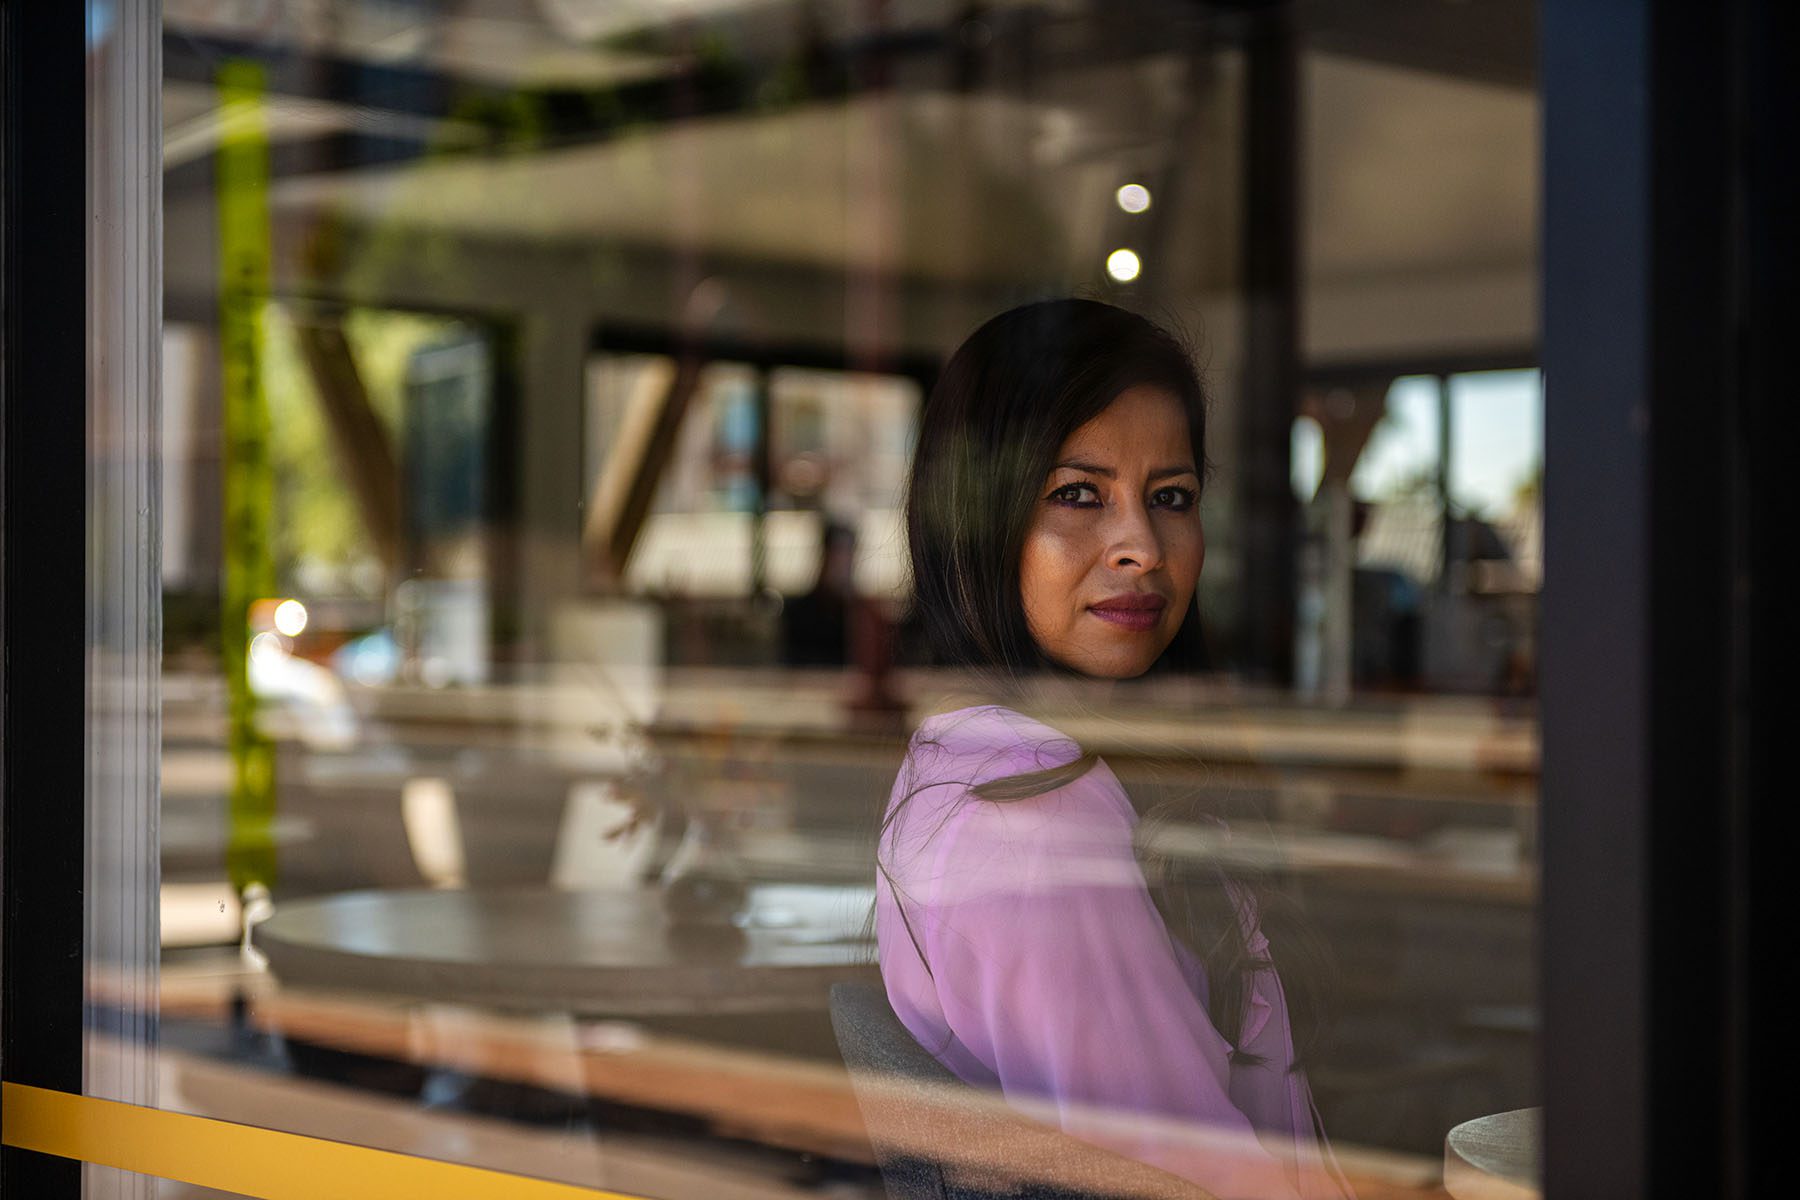 Ylenia Aguilar looks out the window as she poses for a portrait in a cafe